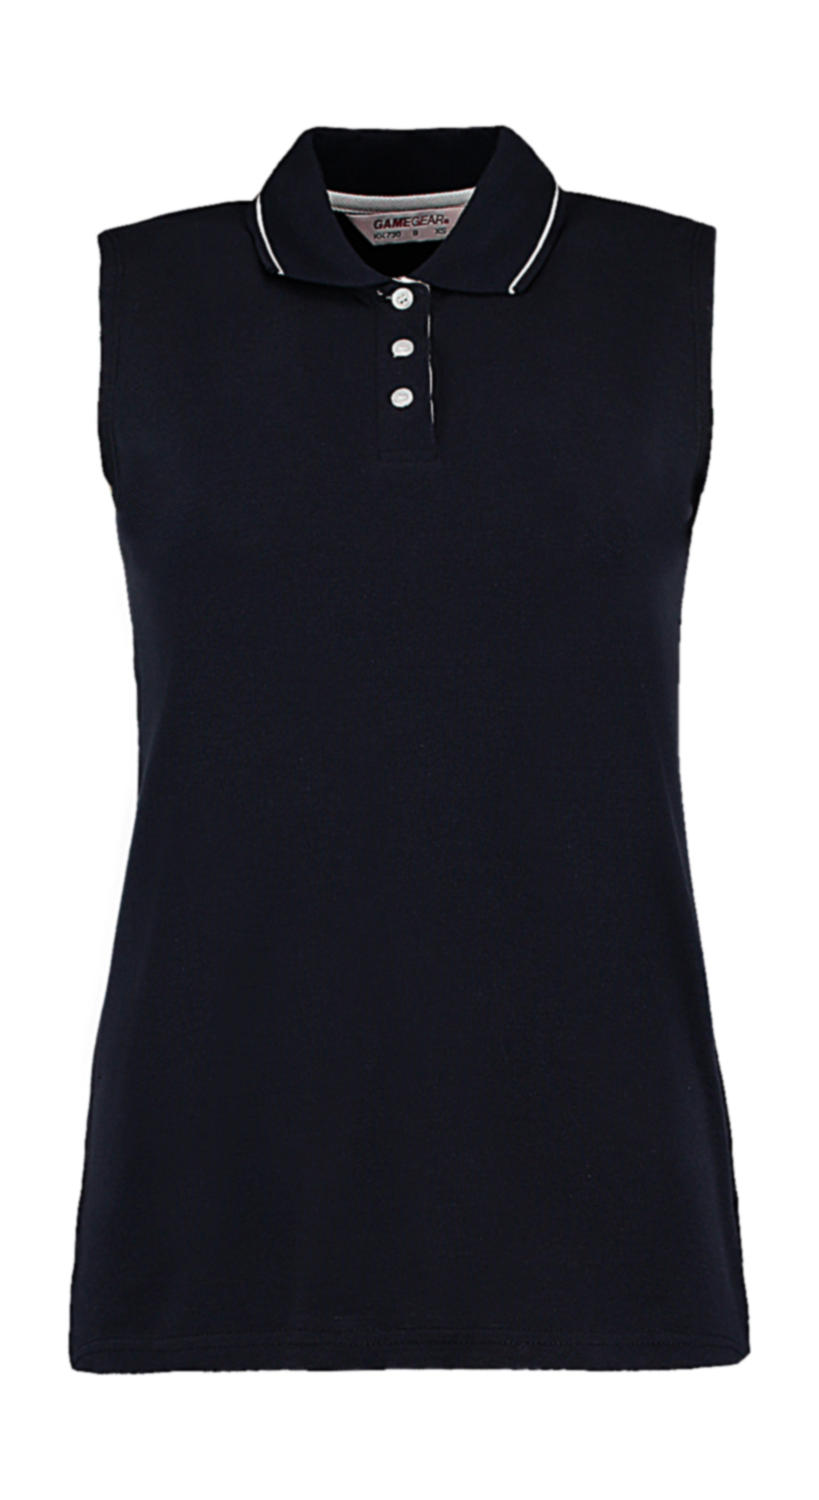  Womens Classic Fit Sleeveless Polo in Farbe Navy/White